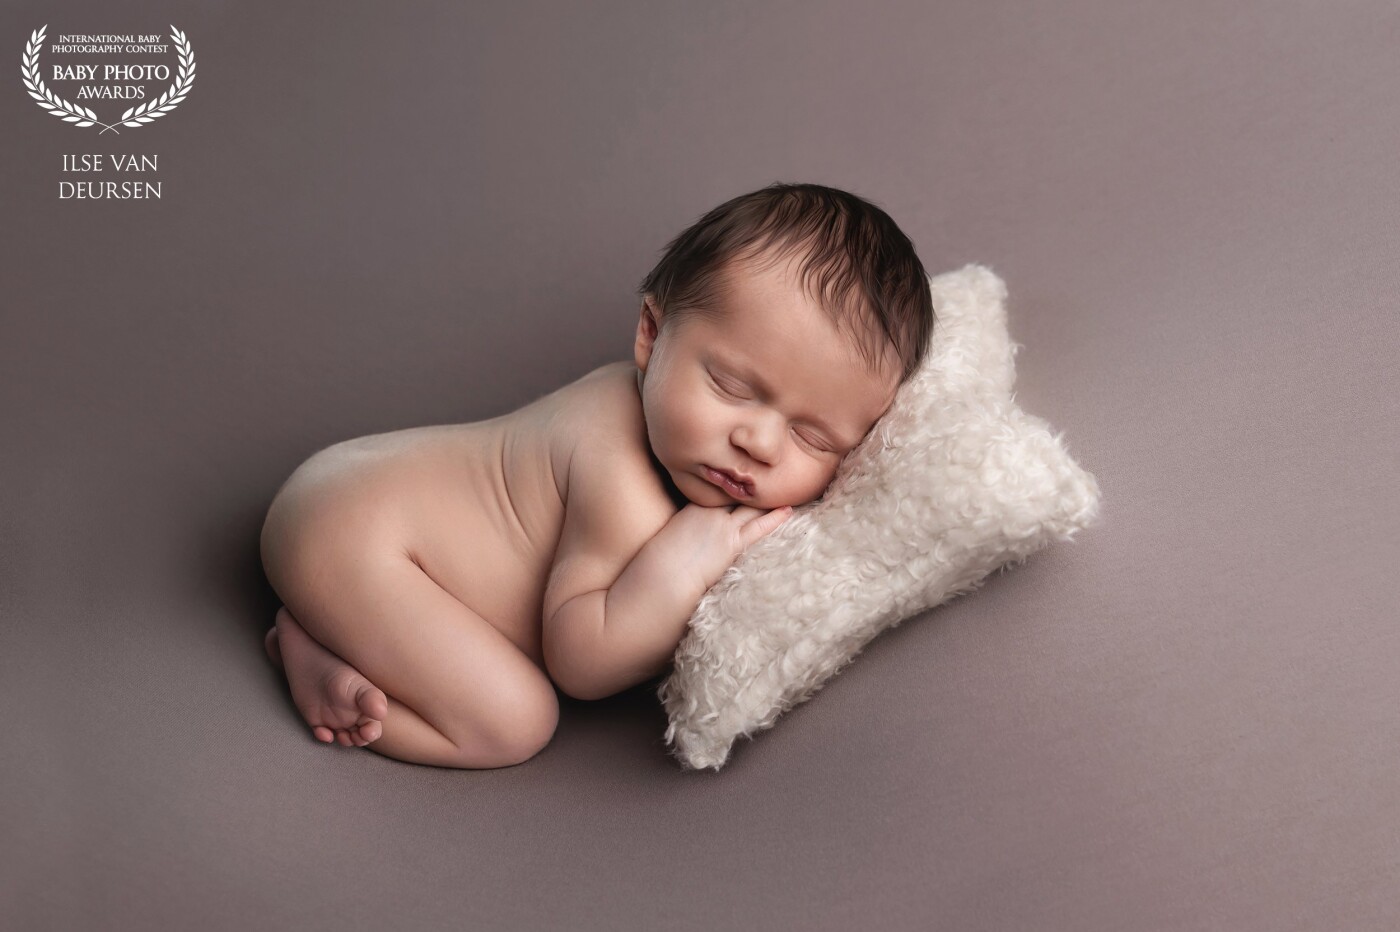 Isn't he cute? This little boy came into my studio and slept like a little prince during the whole session. I was completely in love.